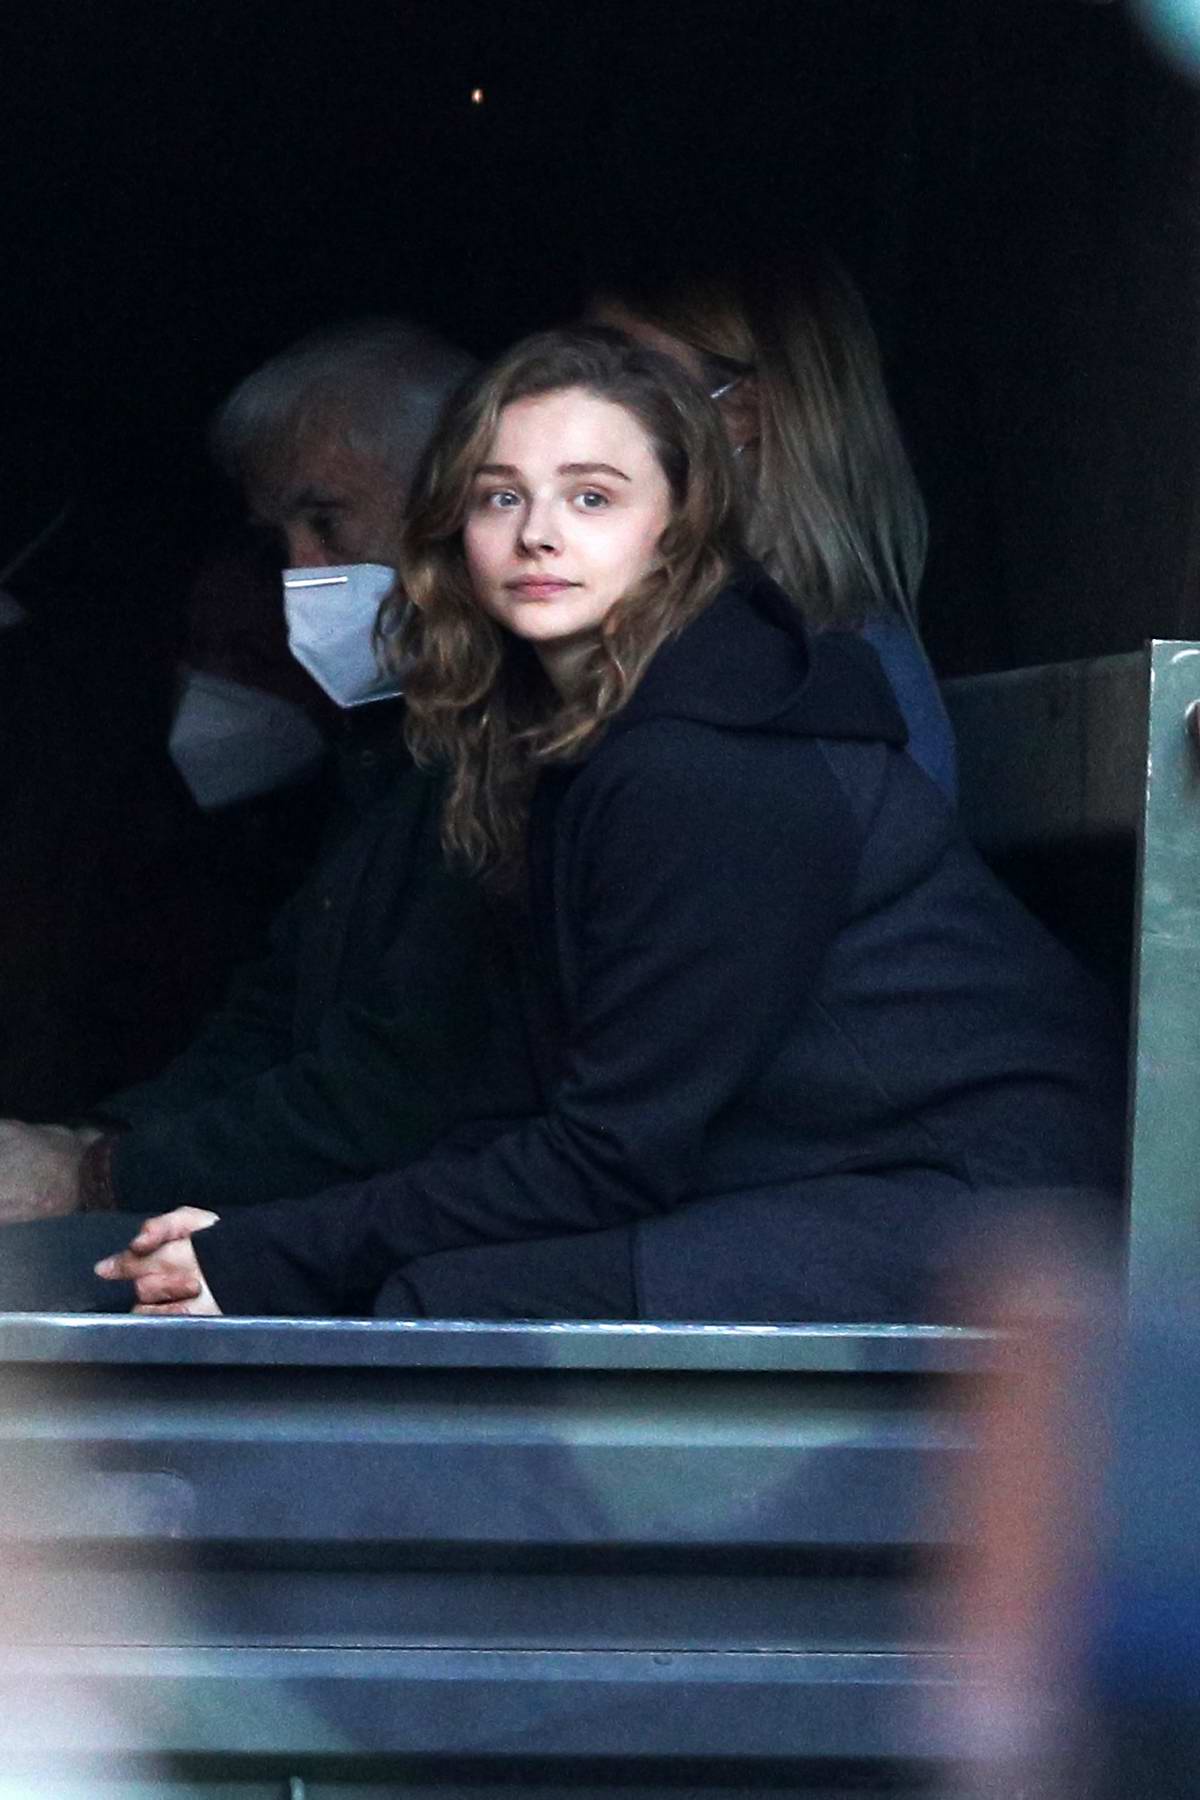 Will You See Former Cartersville Resident Chloe Grace Moretz's New Movie?